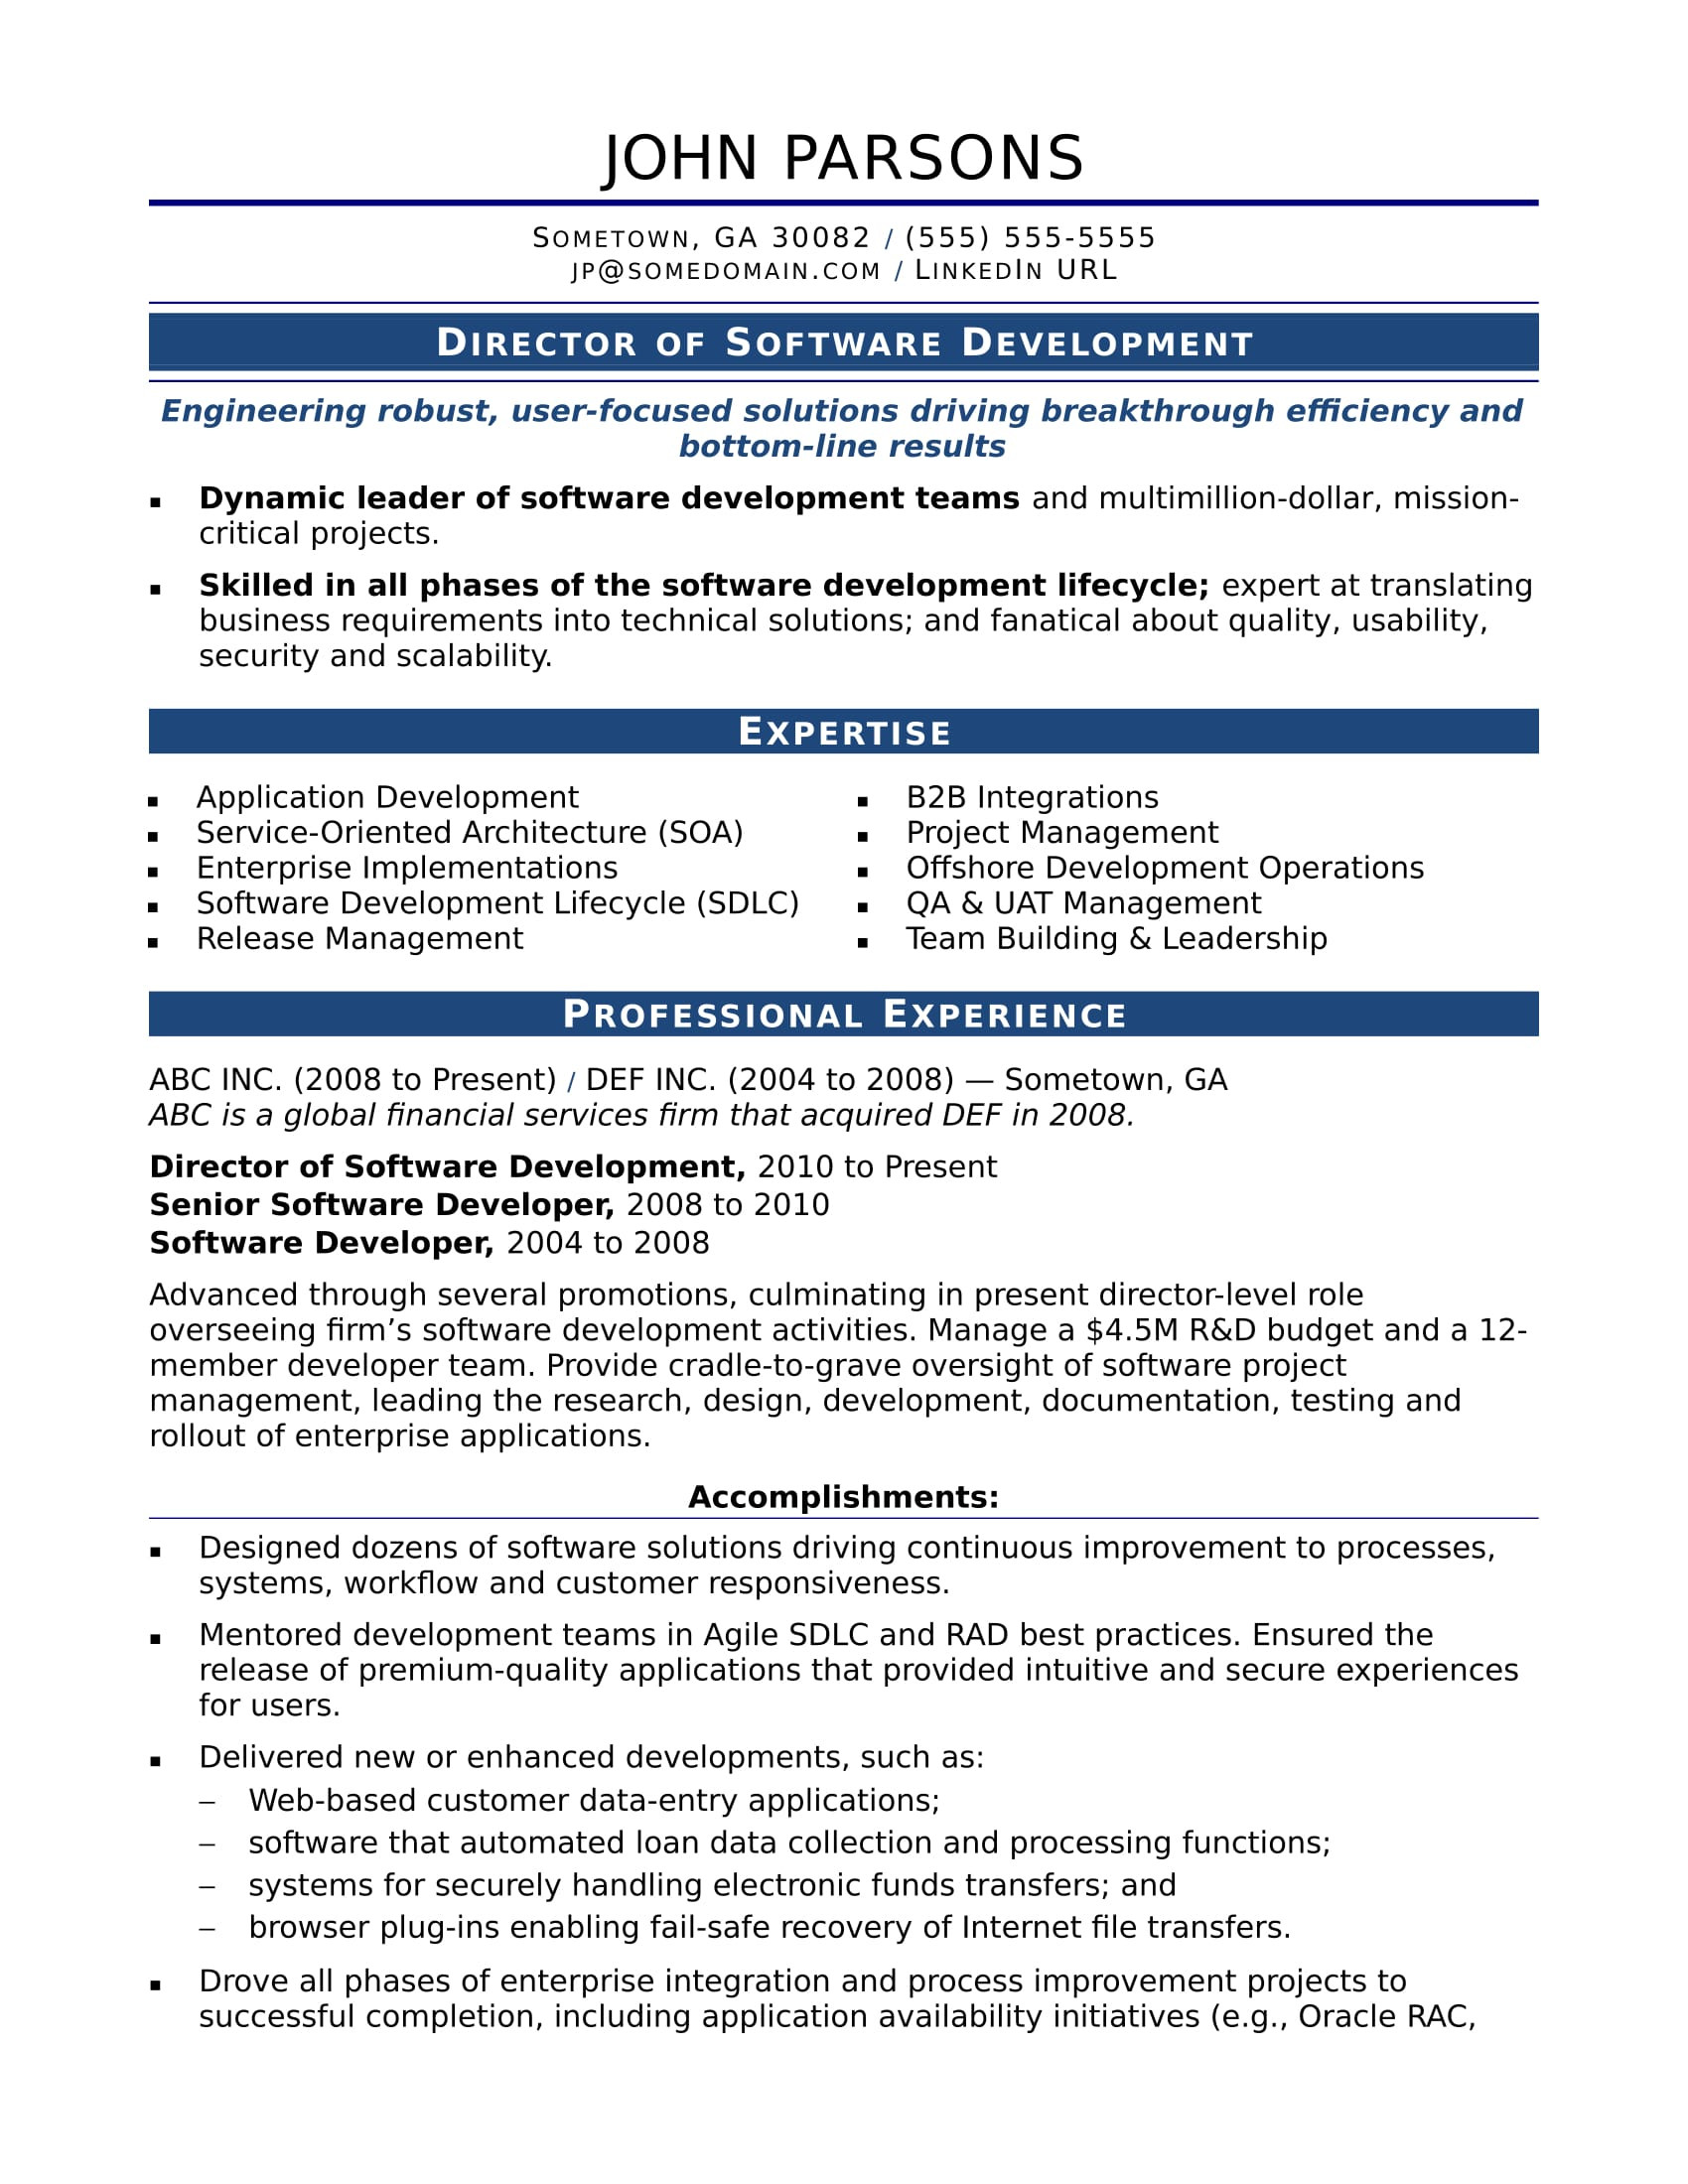 Resume for H1b Application Samples for Computer Science Sample Resume for An Experienced It Developer Monster.com